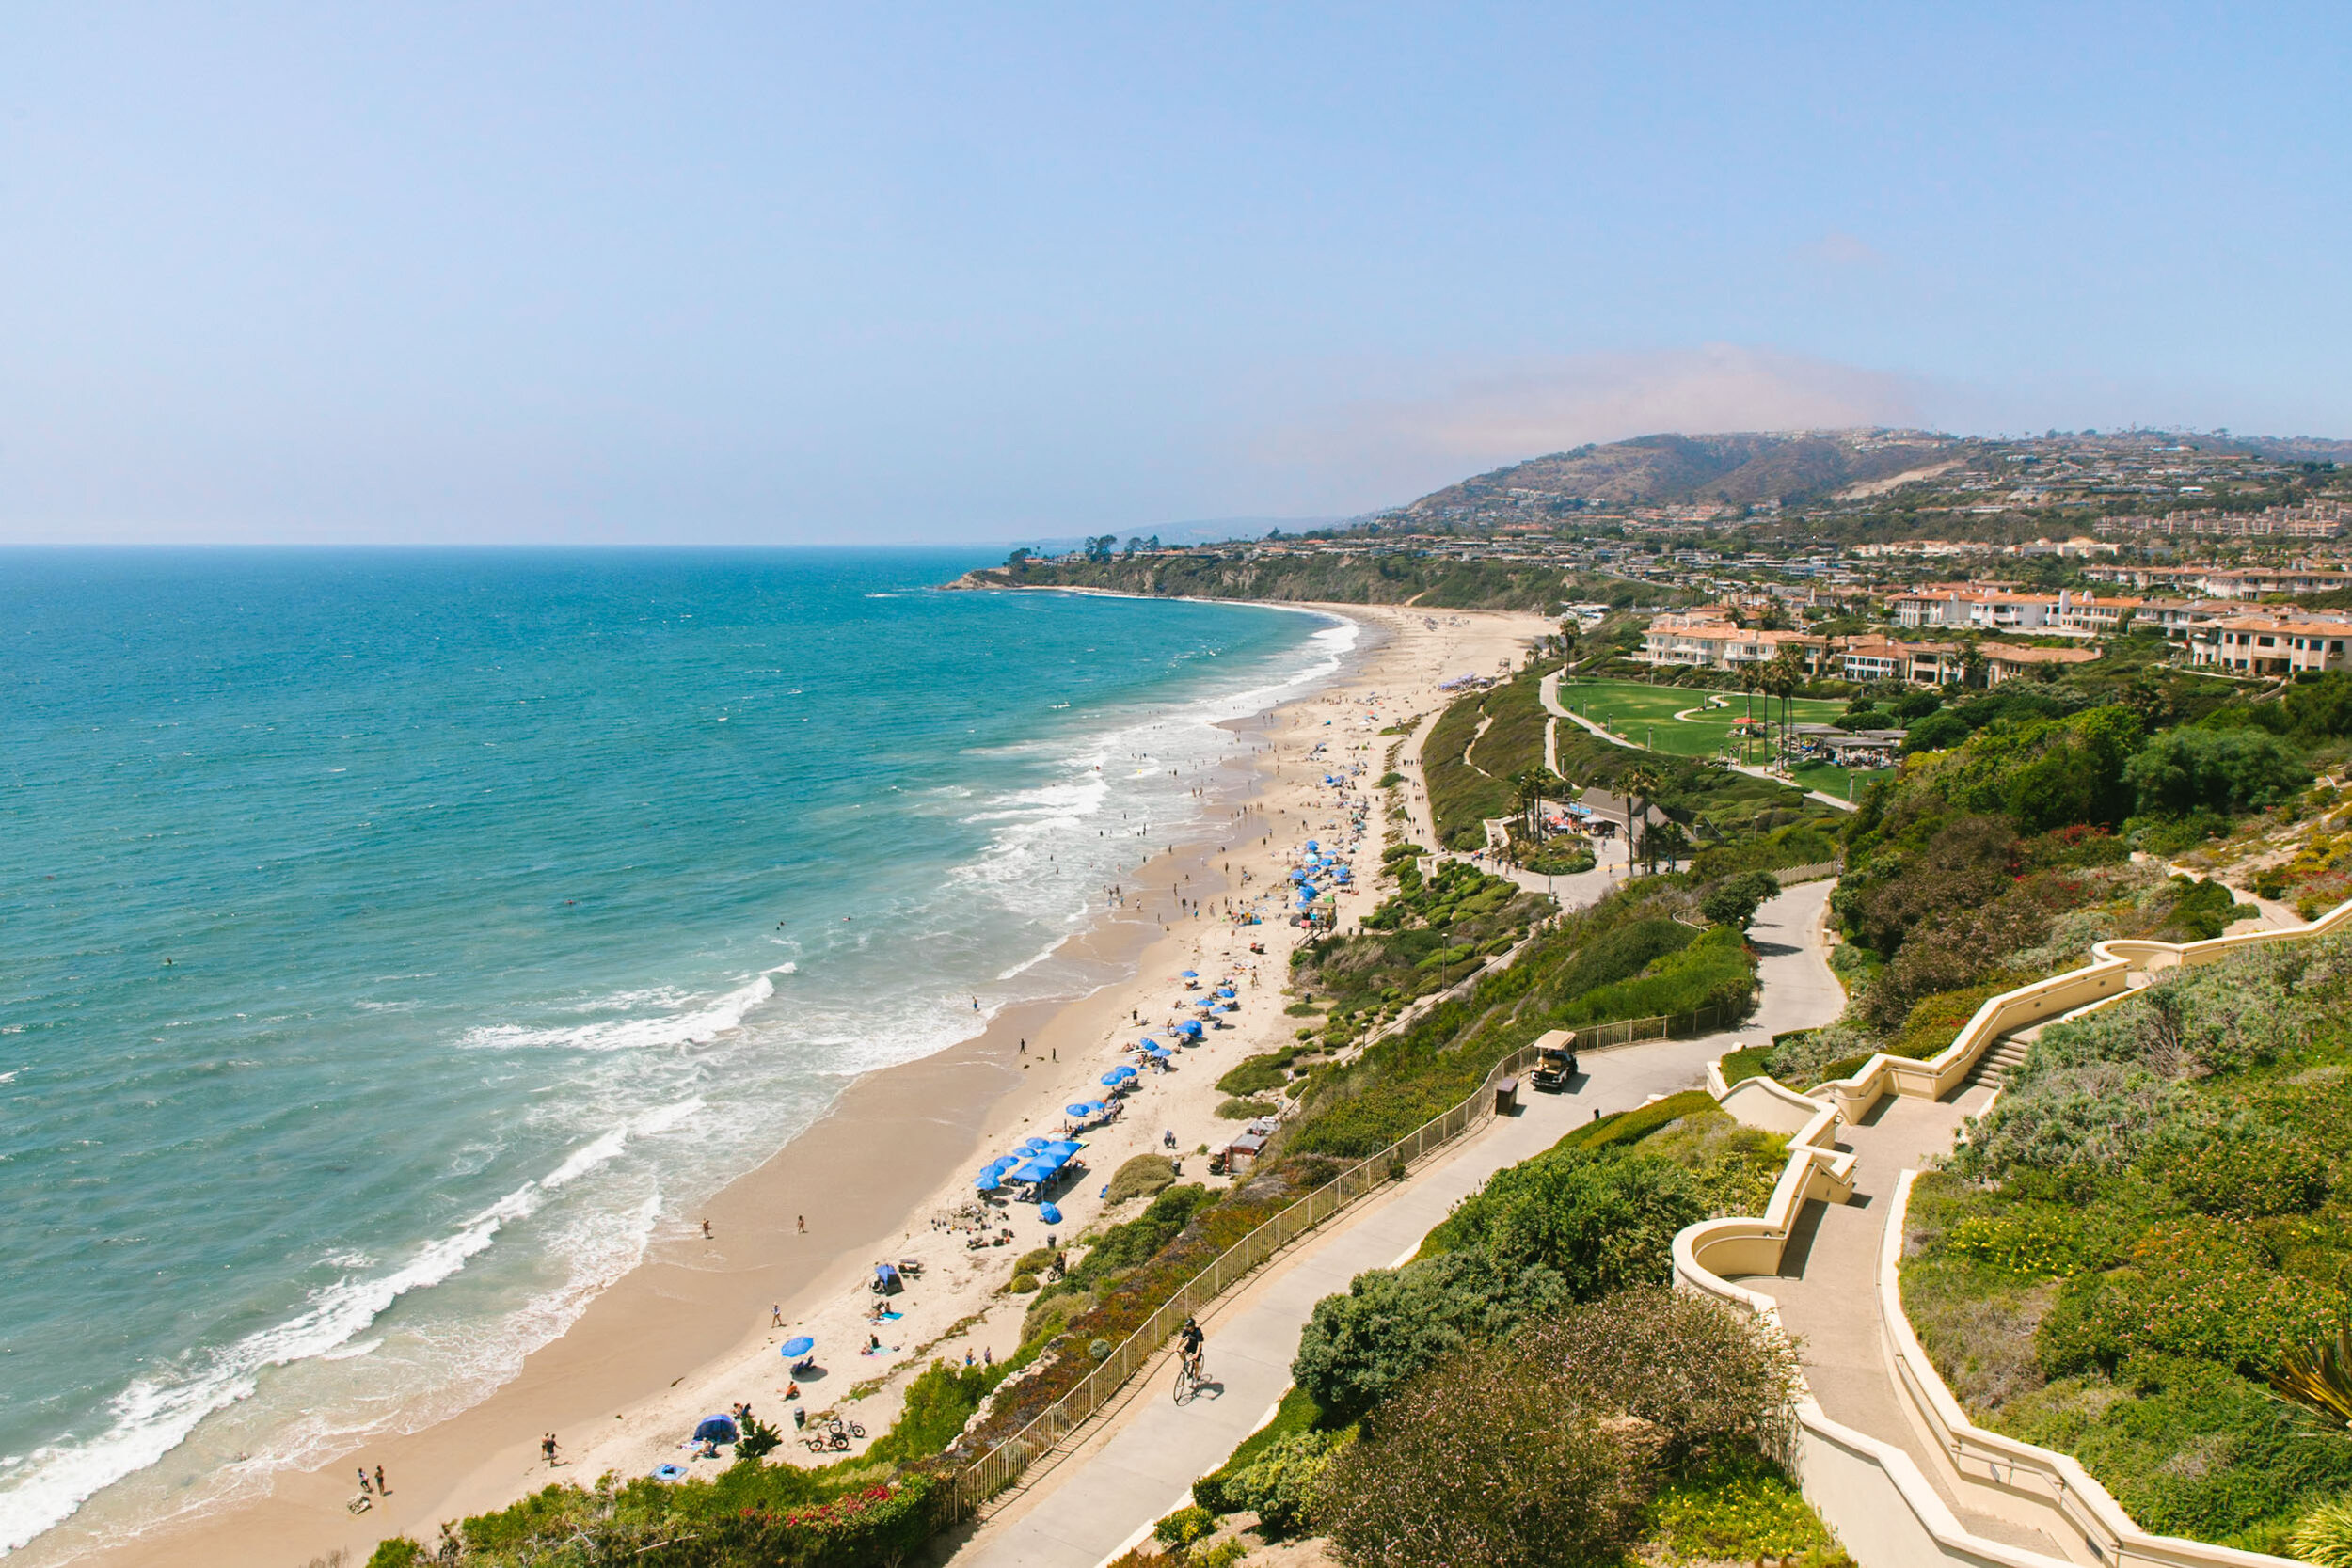 TOURING THE BEST OF CALIFORNIA WITH THE RITZ-CARLTON — Spirited Pursuit